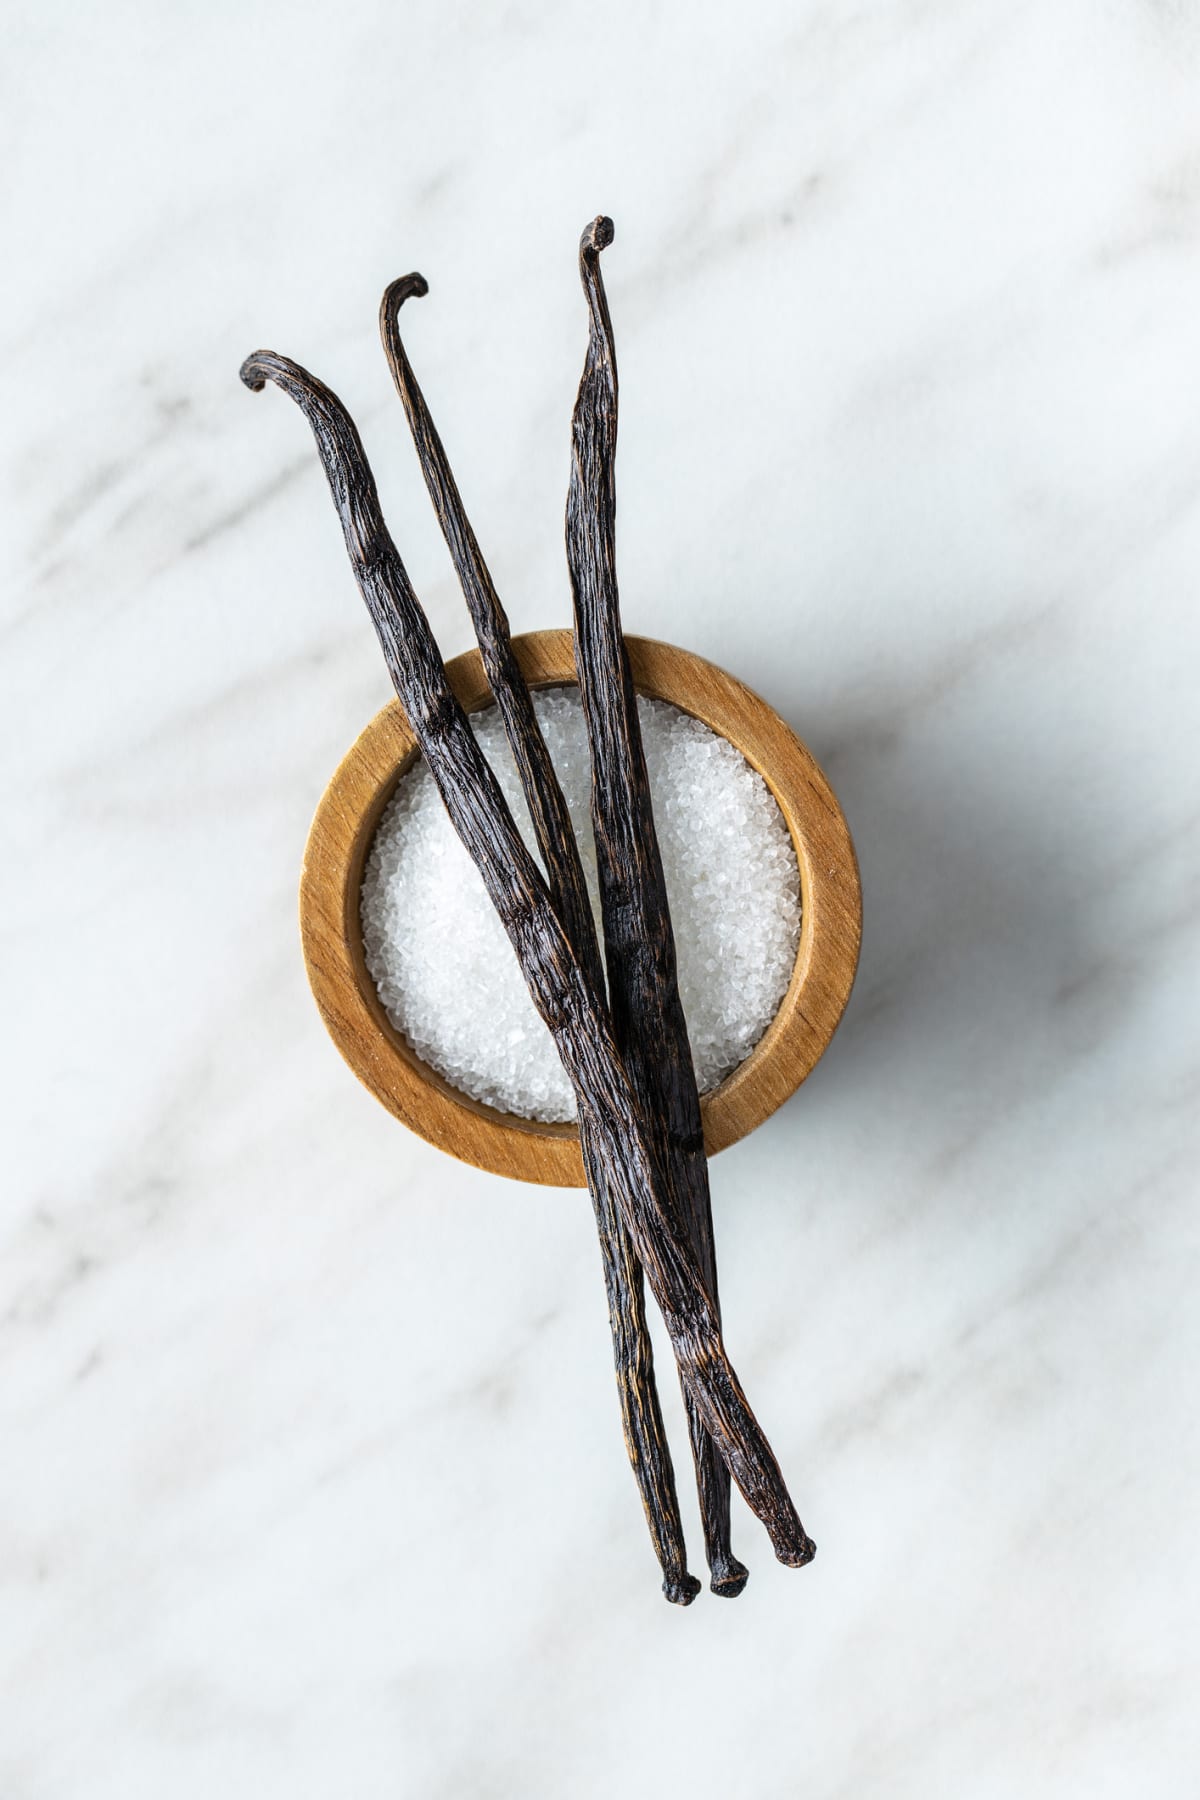 Sticks of vanilla pods resting across the rim of a small wooden bowl of salt